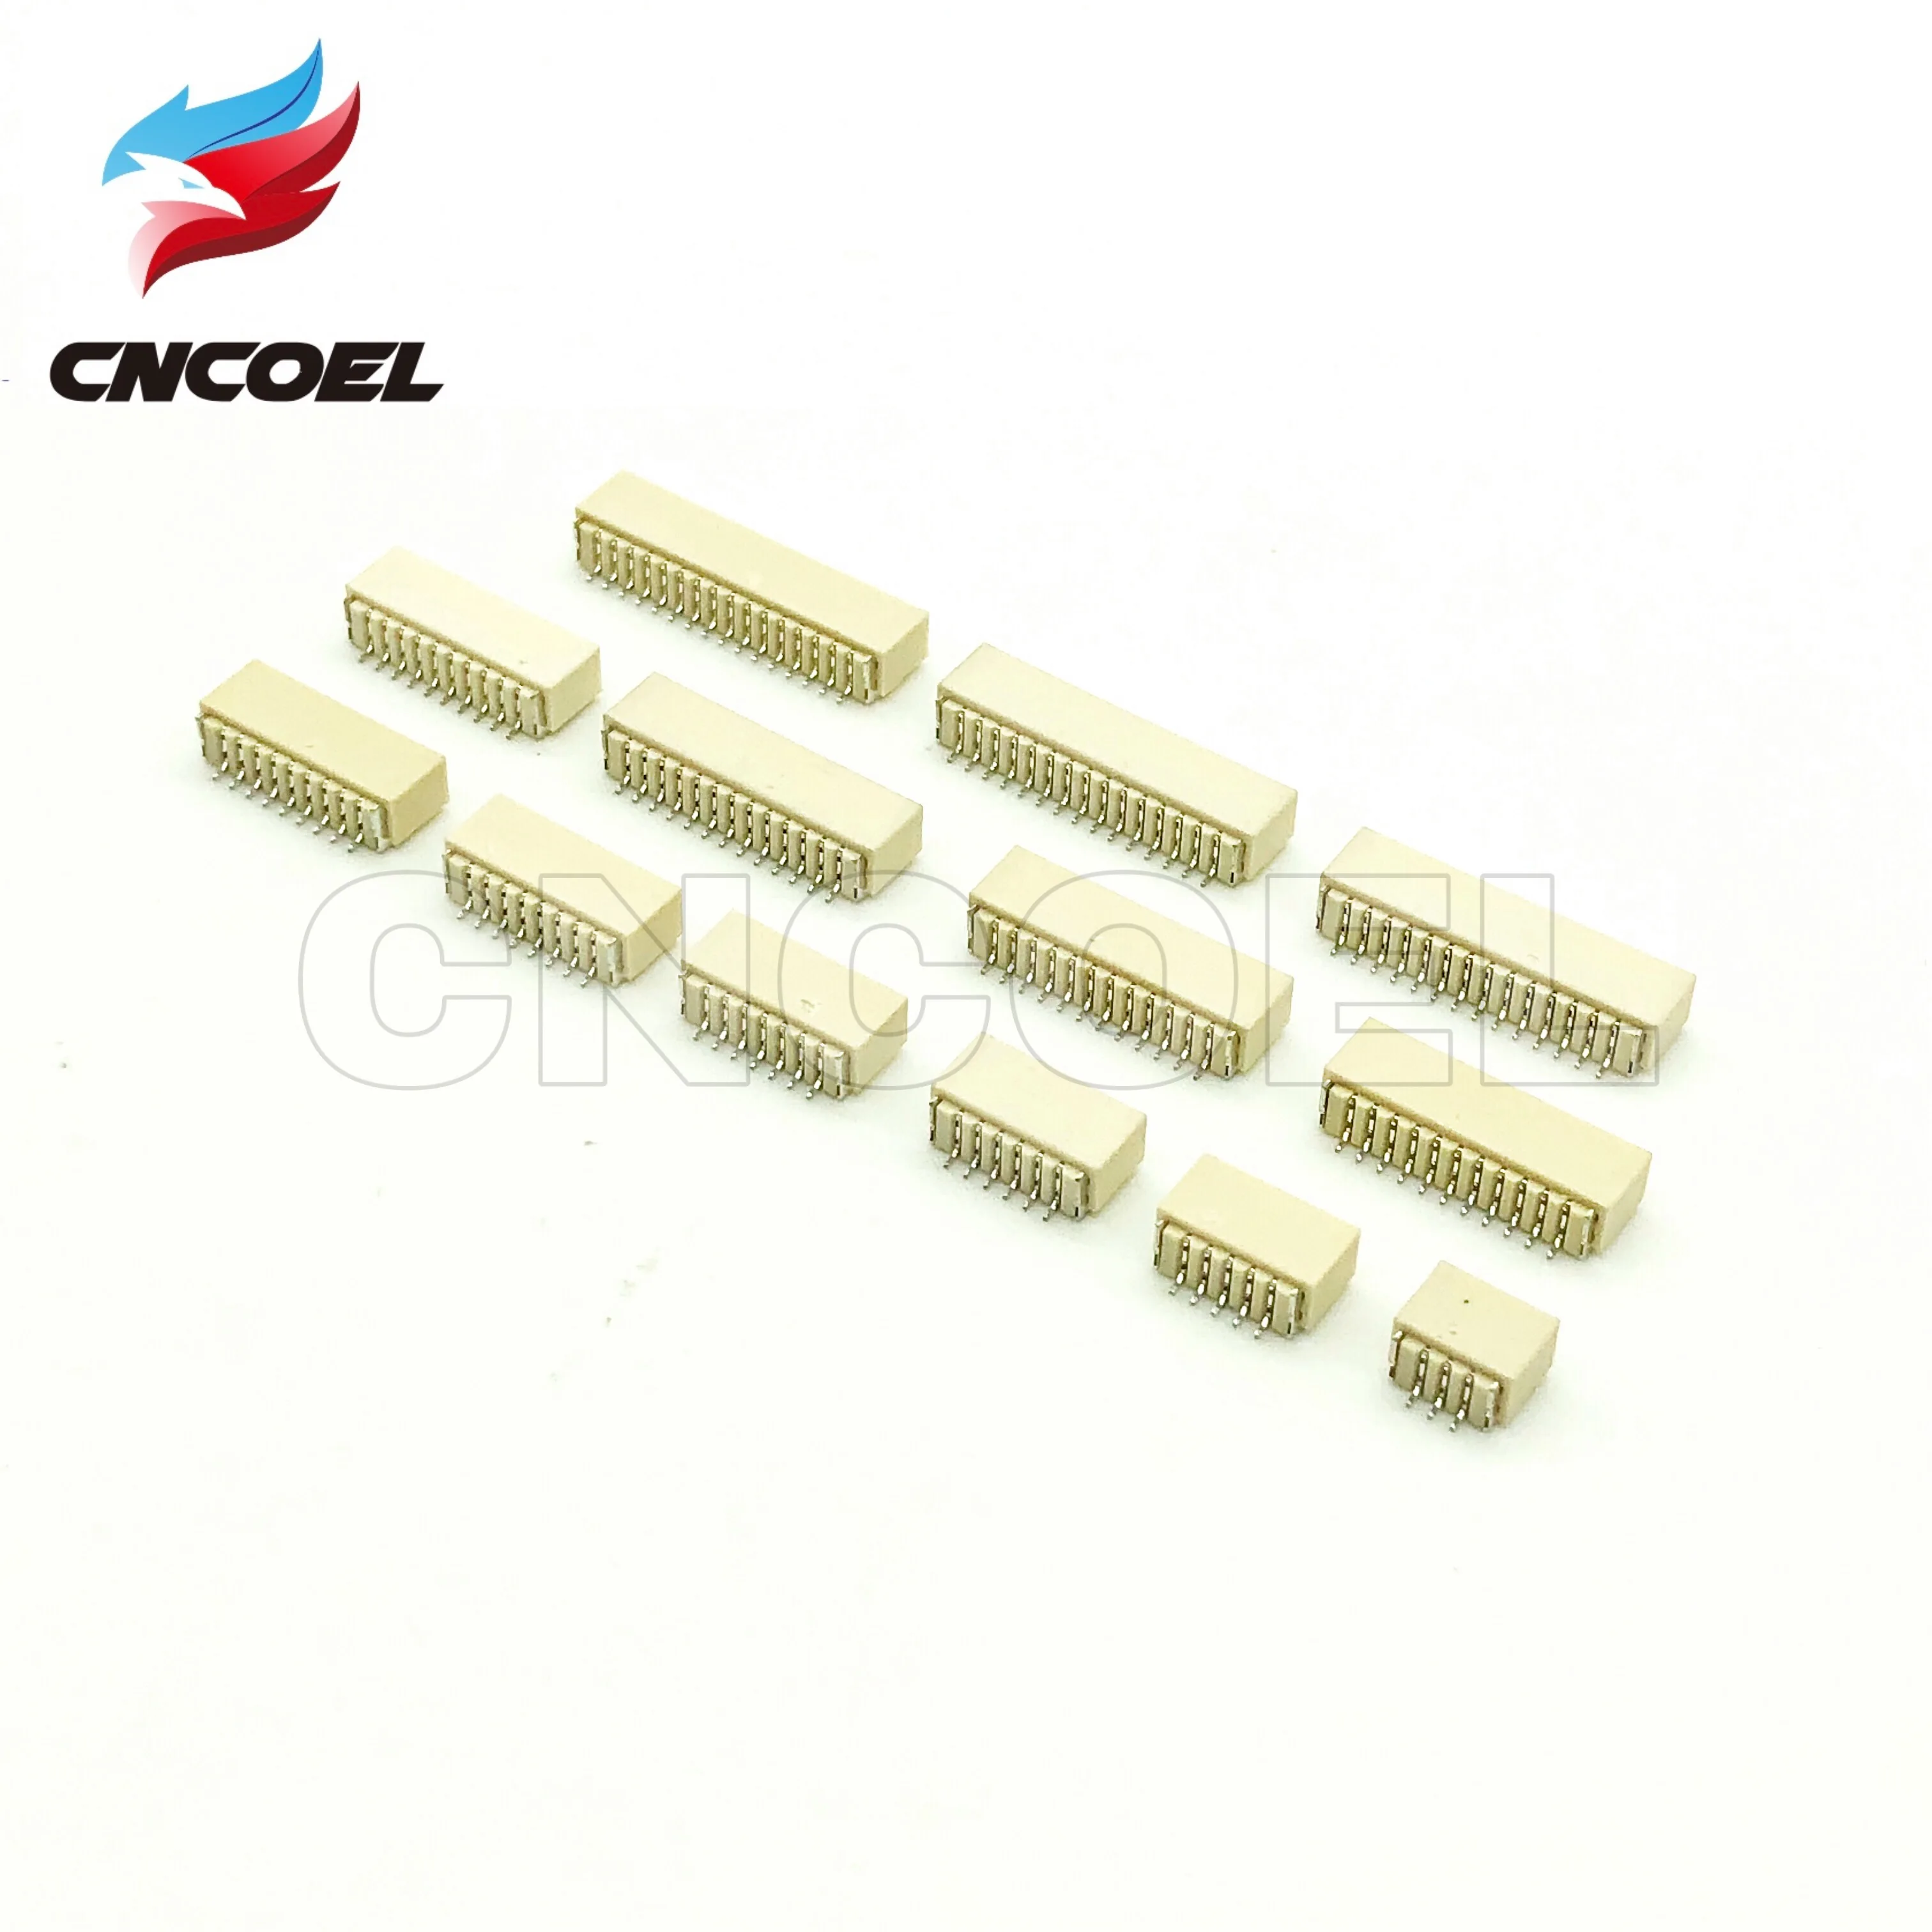 

20Pcs/lot SH 1.0 mm Spacing Connector 2P/3P/4P/5P/6P/7P/8P/9P/10P/11P/12P Horizontal SMD Connector 1.0mm pitch patch plug